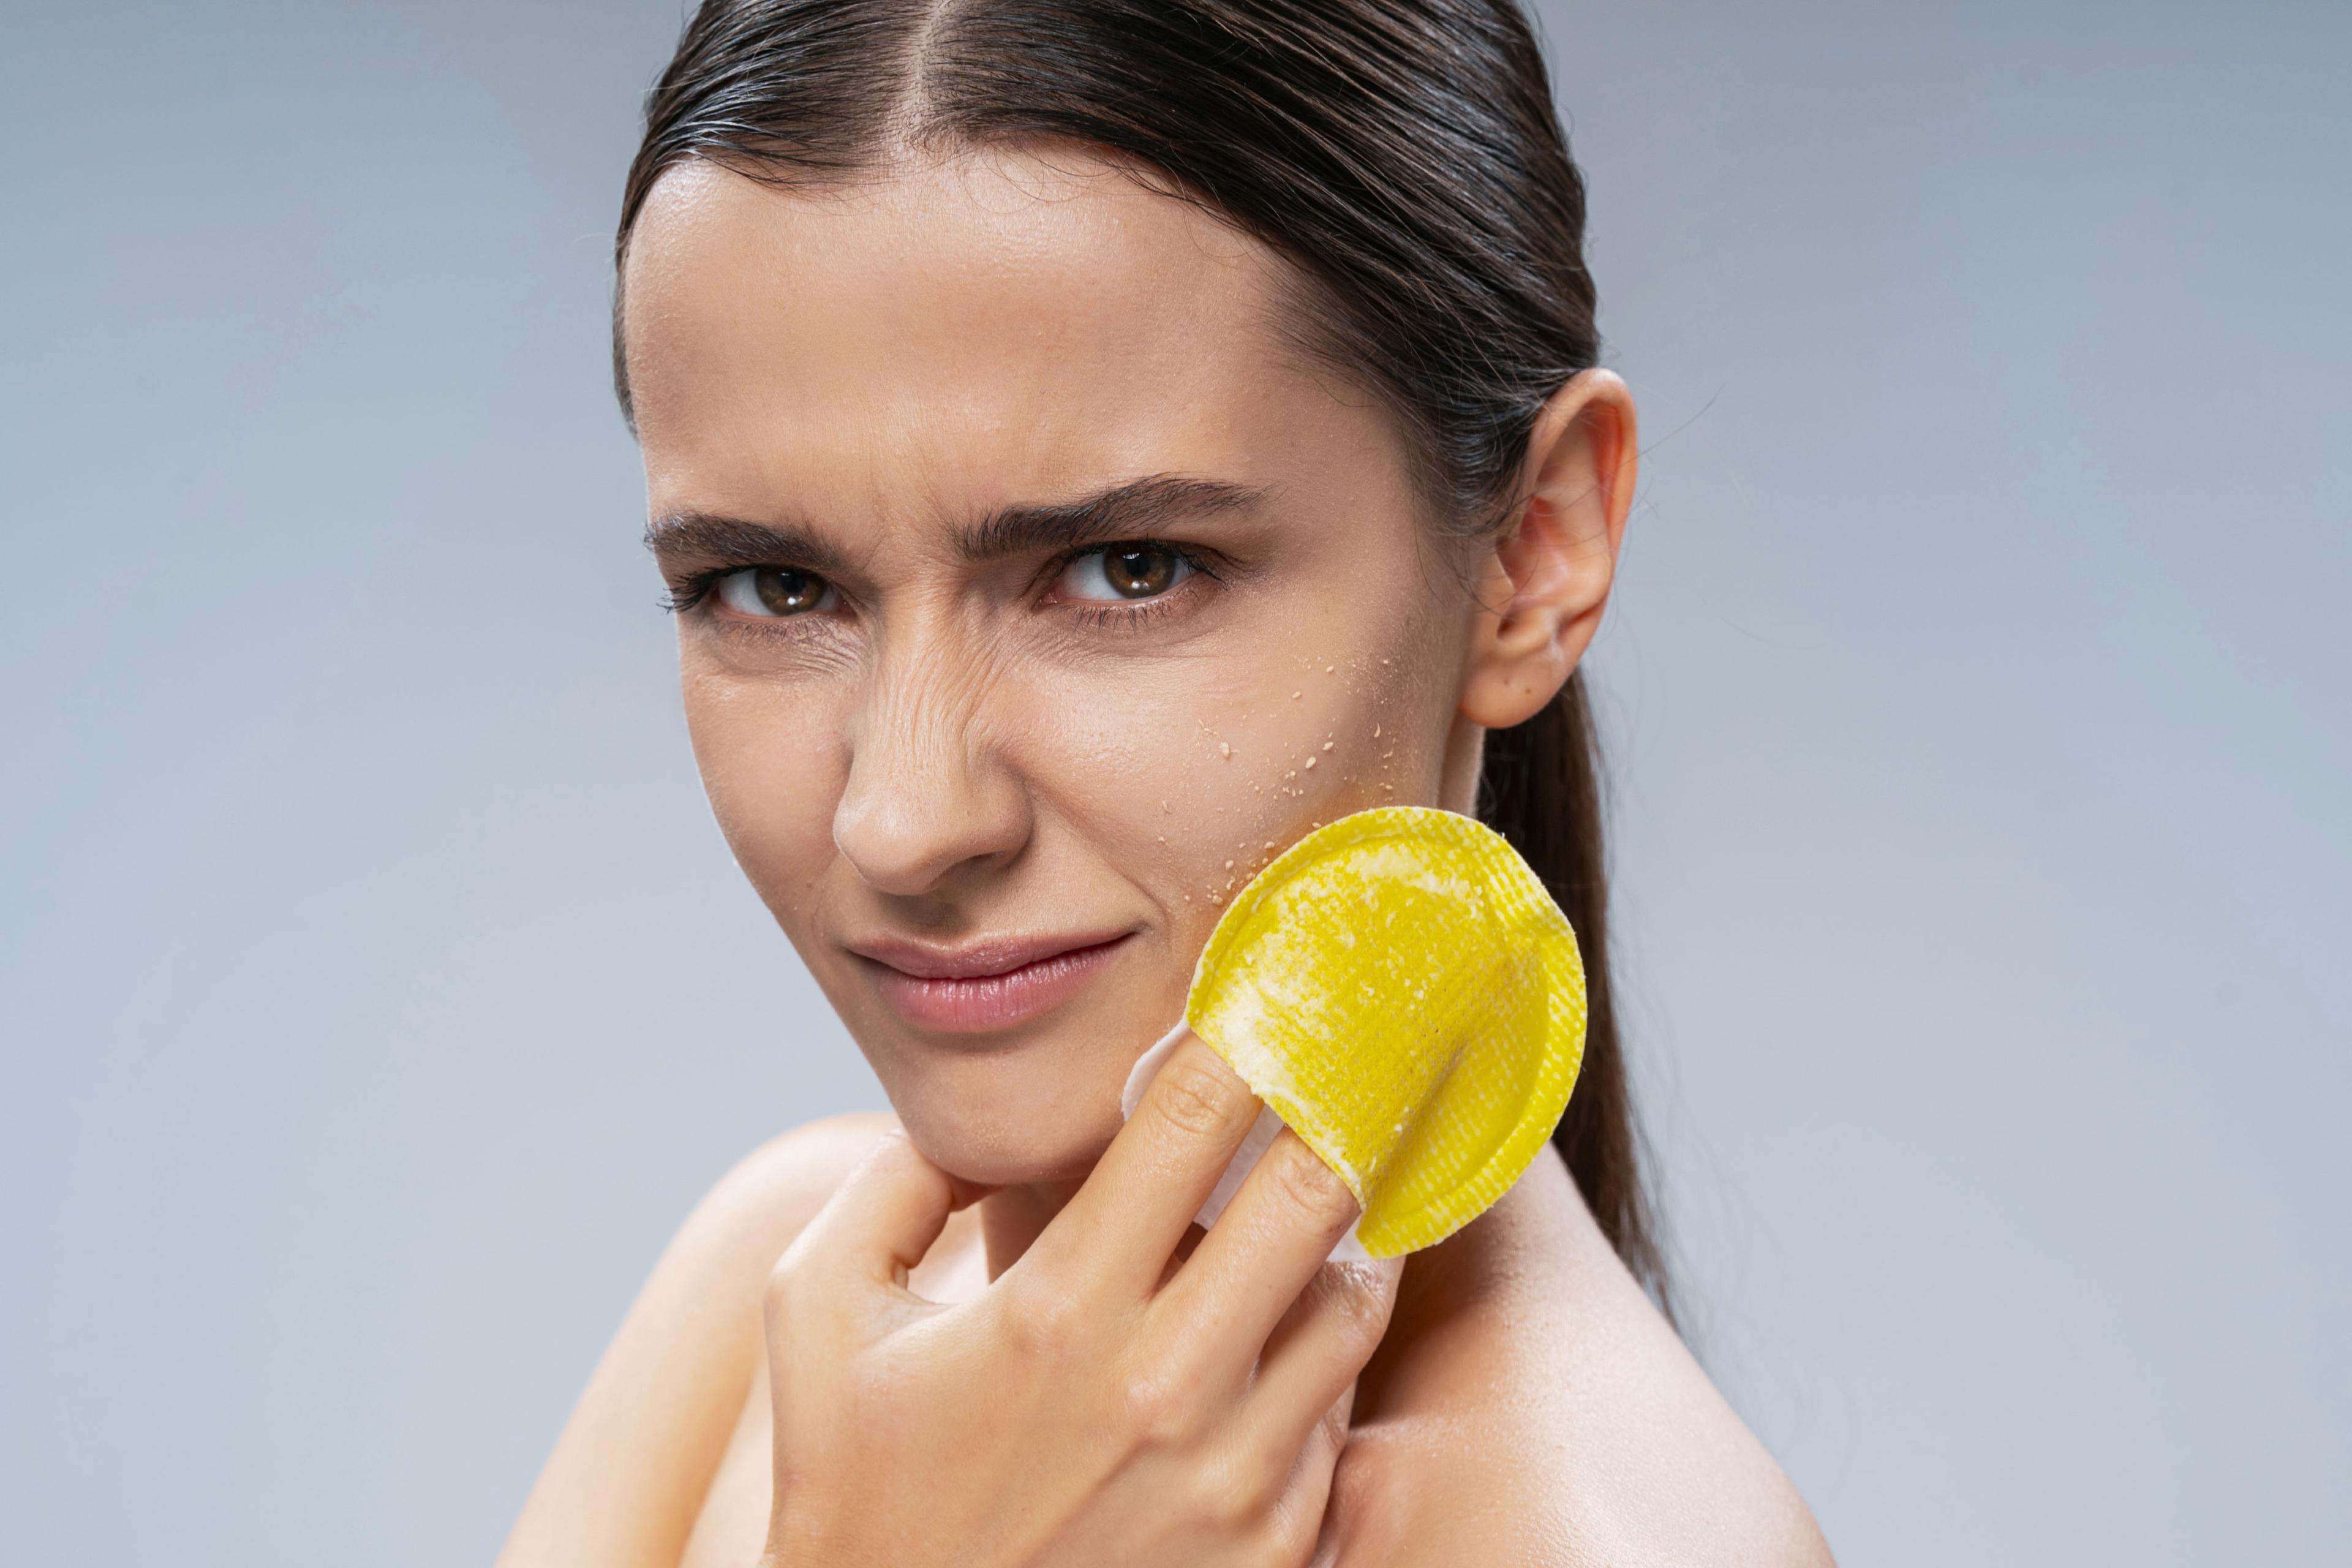 How to Exfoliate Skin: Tips to Keep it Healthy and Supple